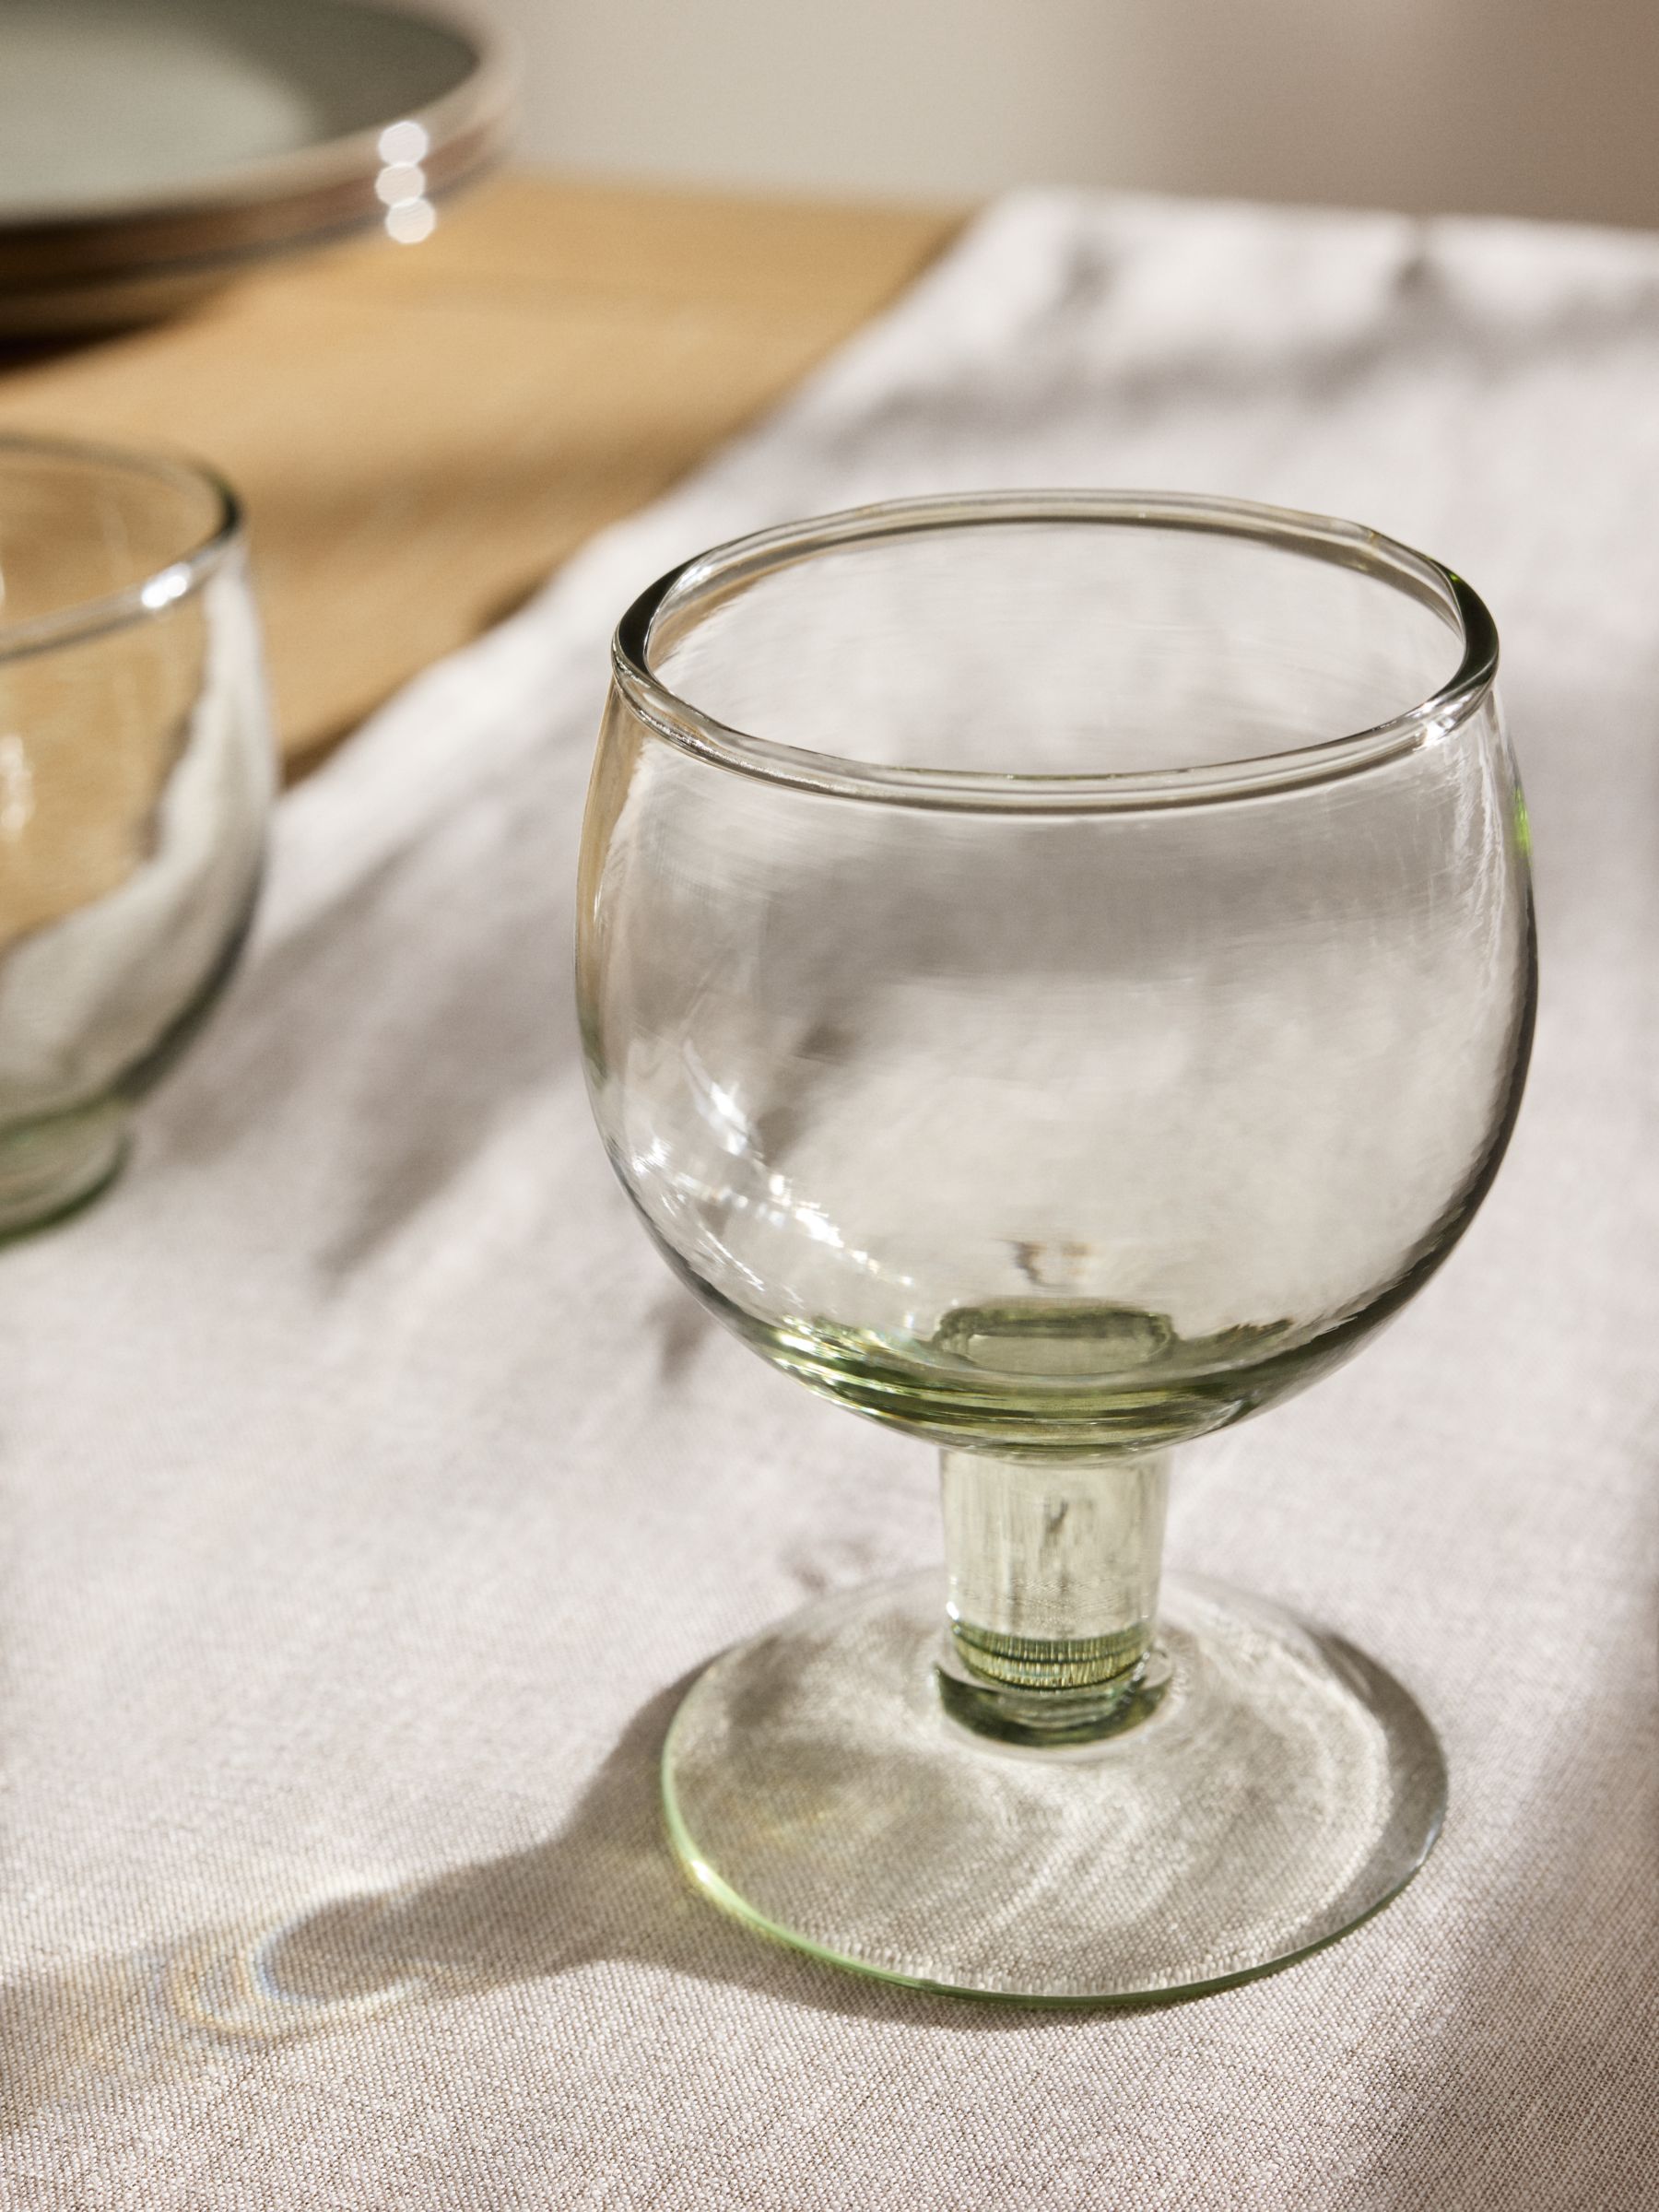 John Lewis Country Short Stem Wine Glass, Clear